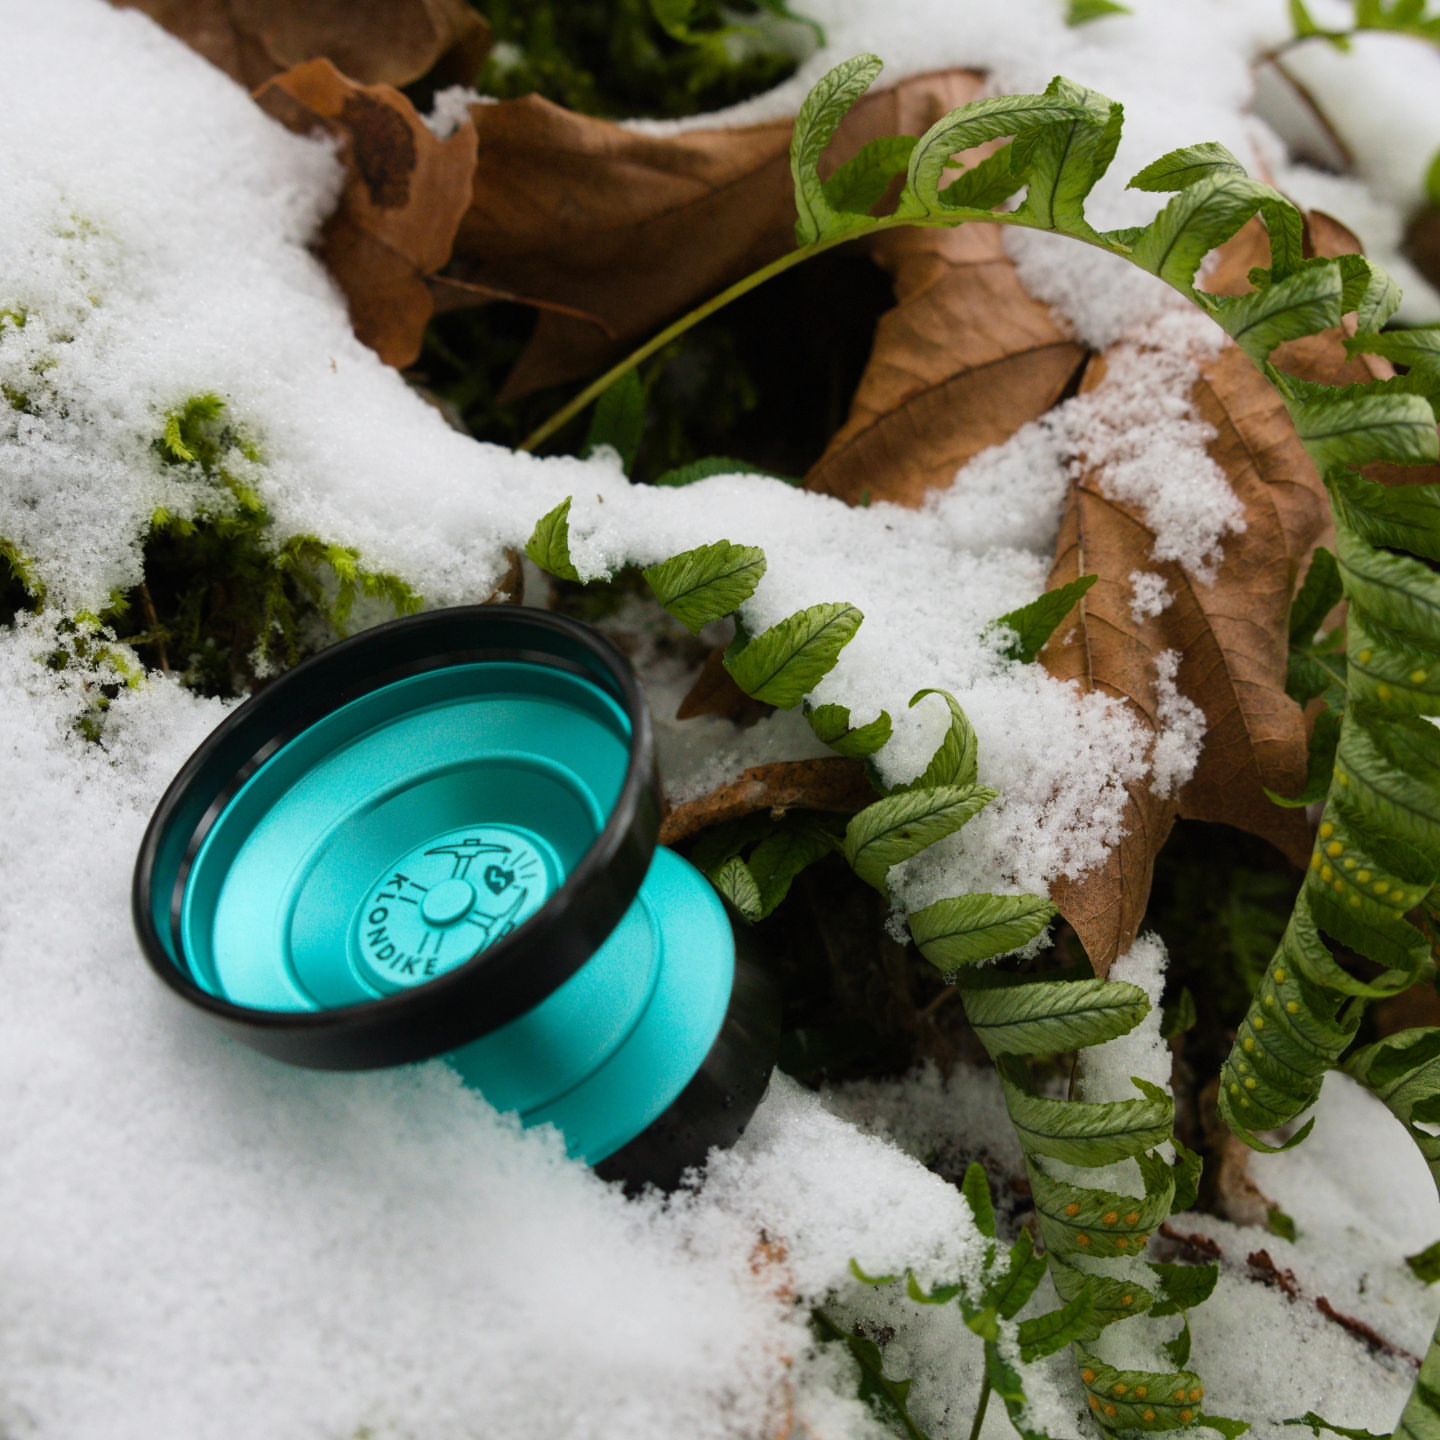 Klondike by @clyw 
Felt fitting to get pictures of it in the snow :) 
#yoyos #yotography #todaysthrow #clyw